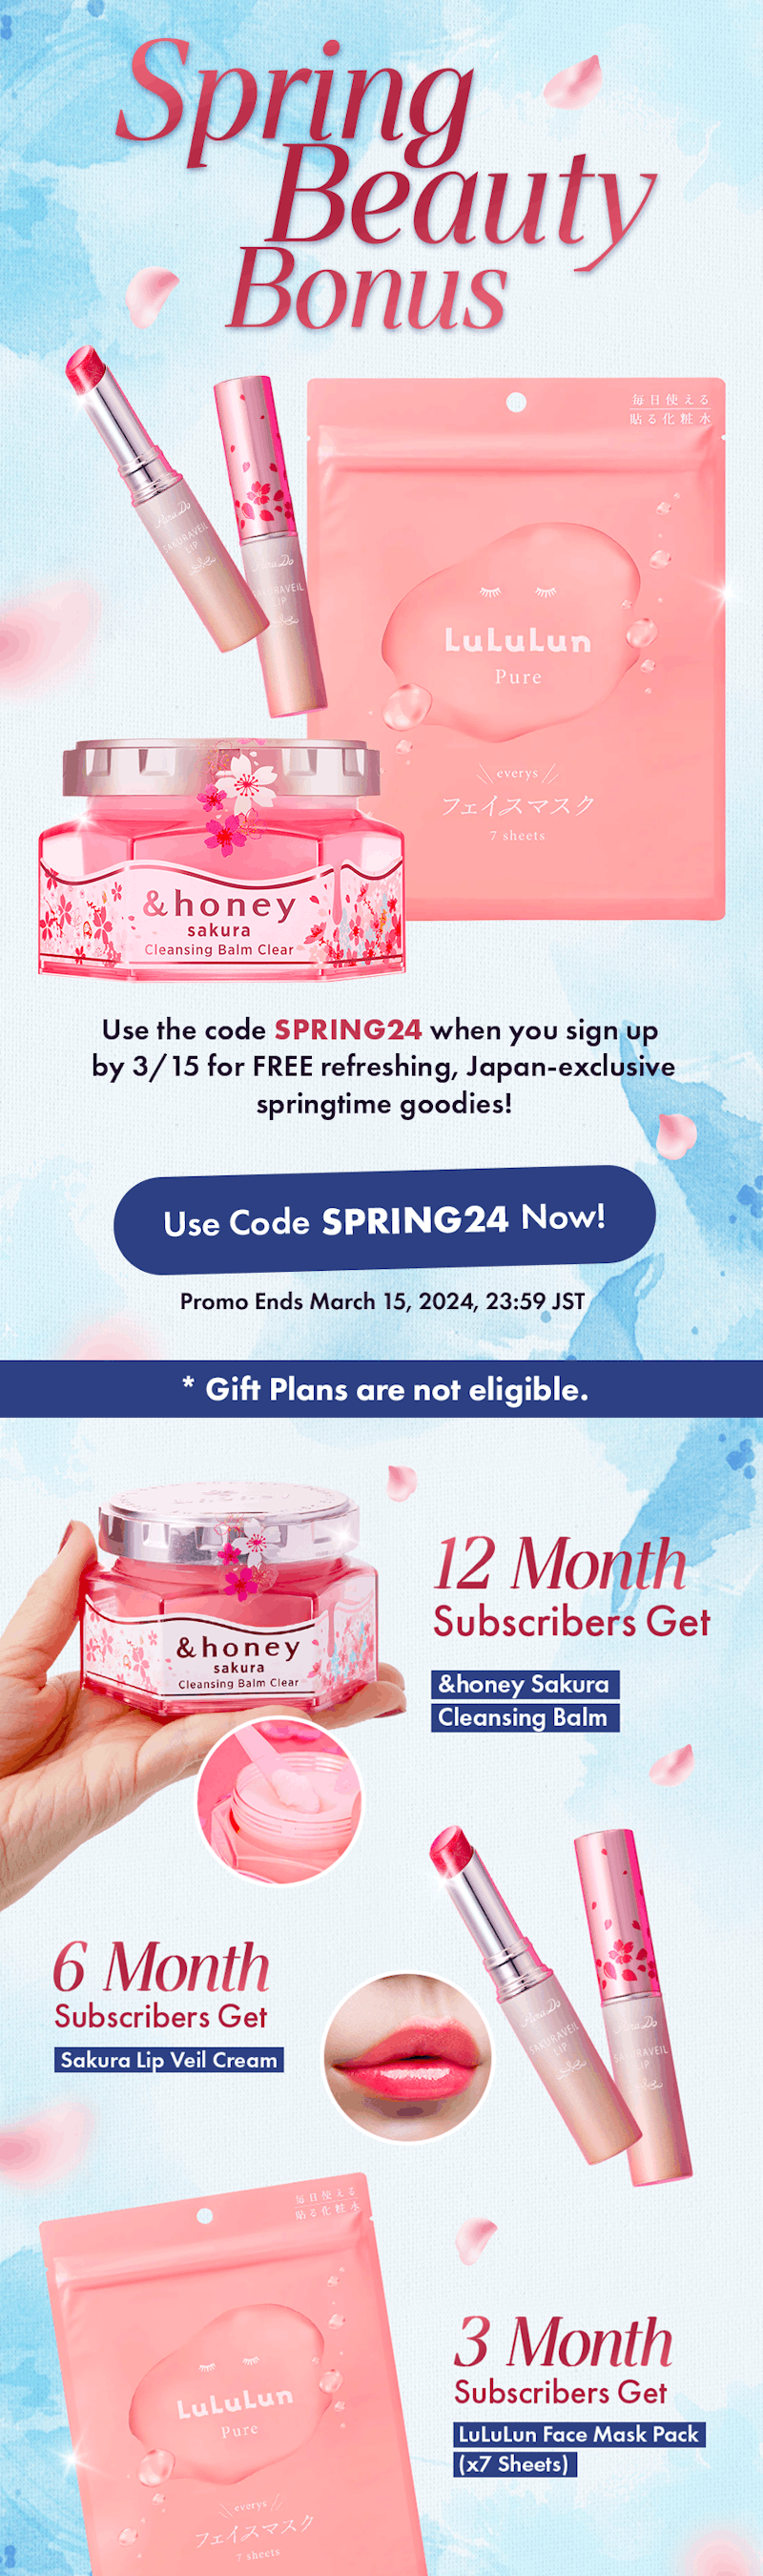 nomakenolife use the code SPRING24 when you sign up by 3/15 for your FREE Spring Beauty Bonus items!